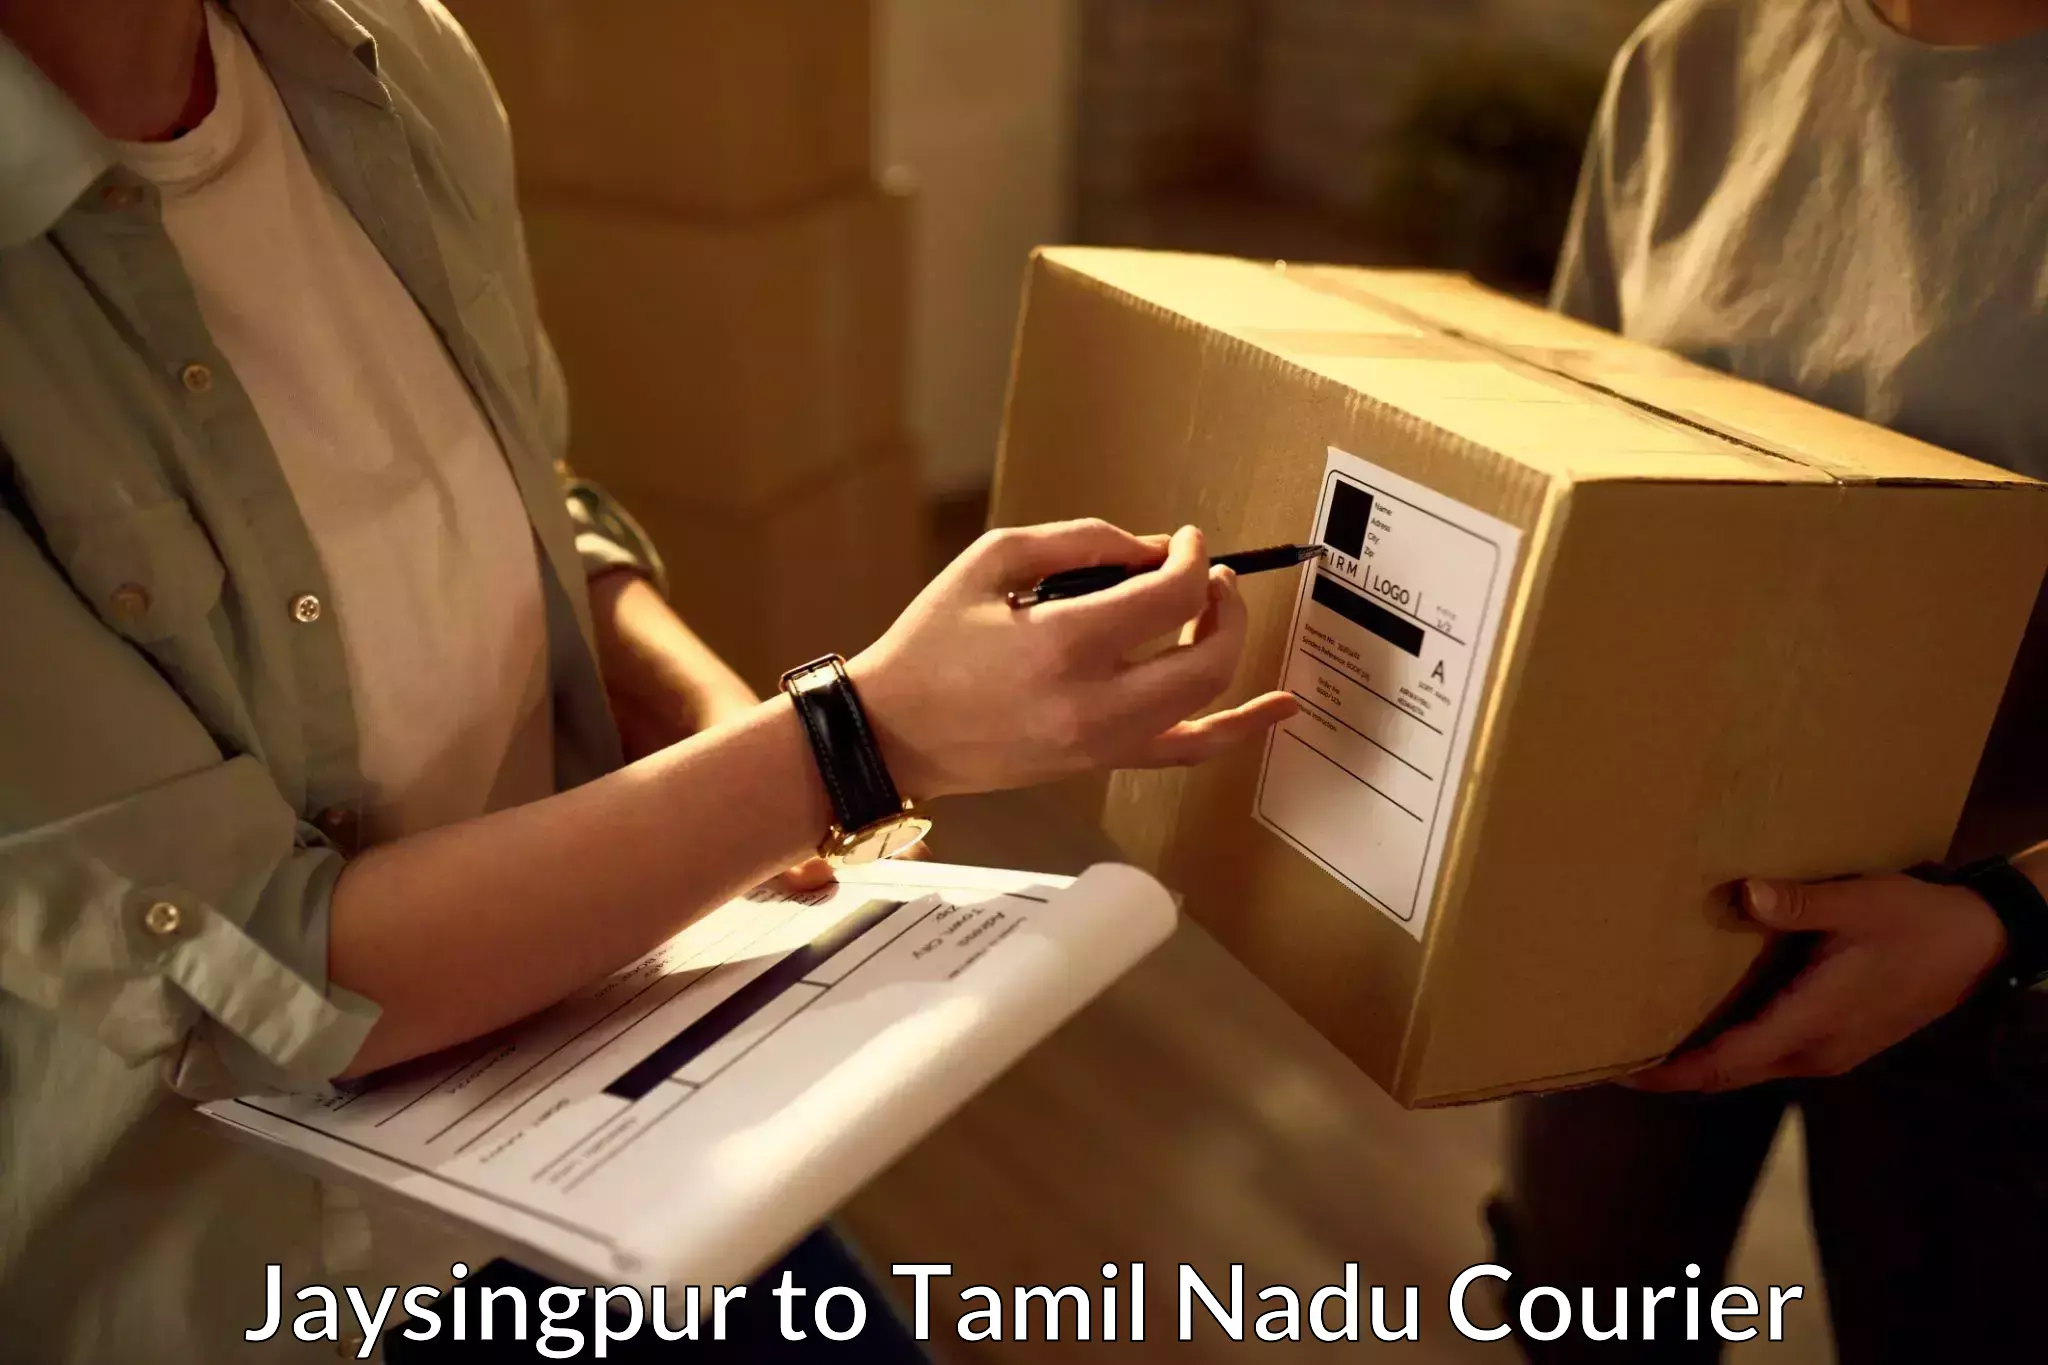 State-of-the-art courier technology Jaysingpur to Rajapalayam